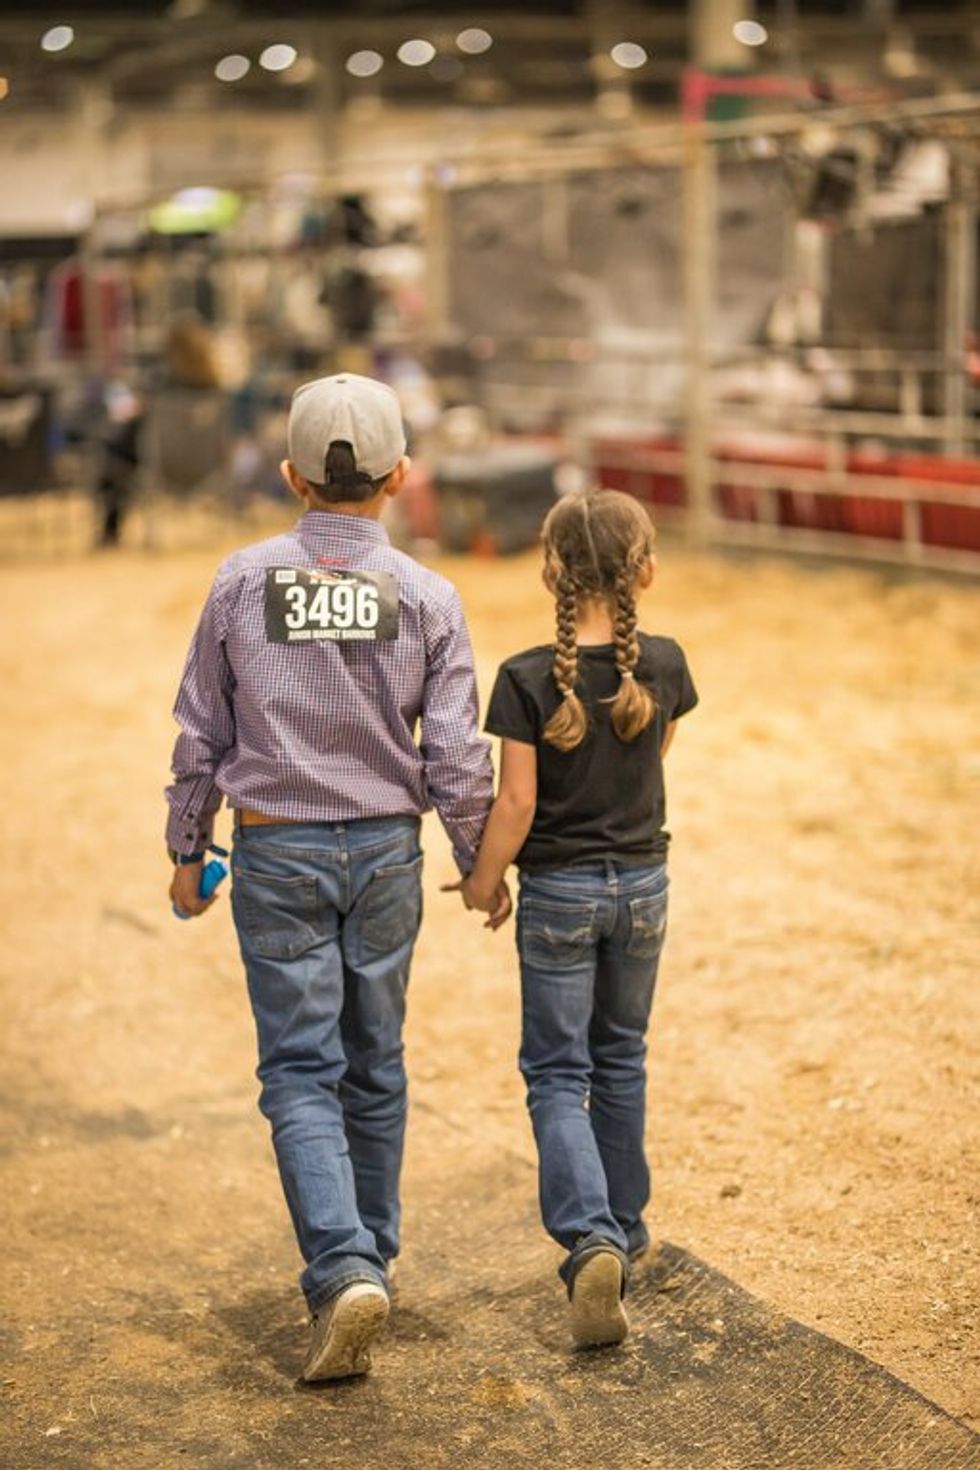 Two children, a boy and girl, with their backs to the camera, walking along a dirt-lined arena at the rodeo